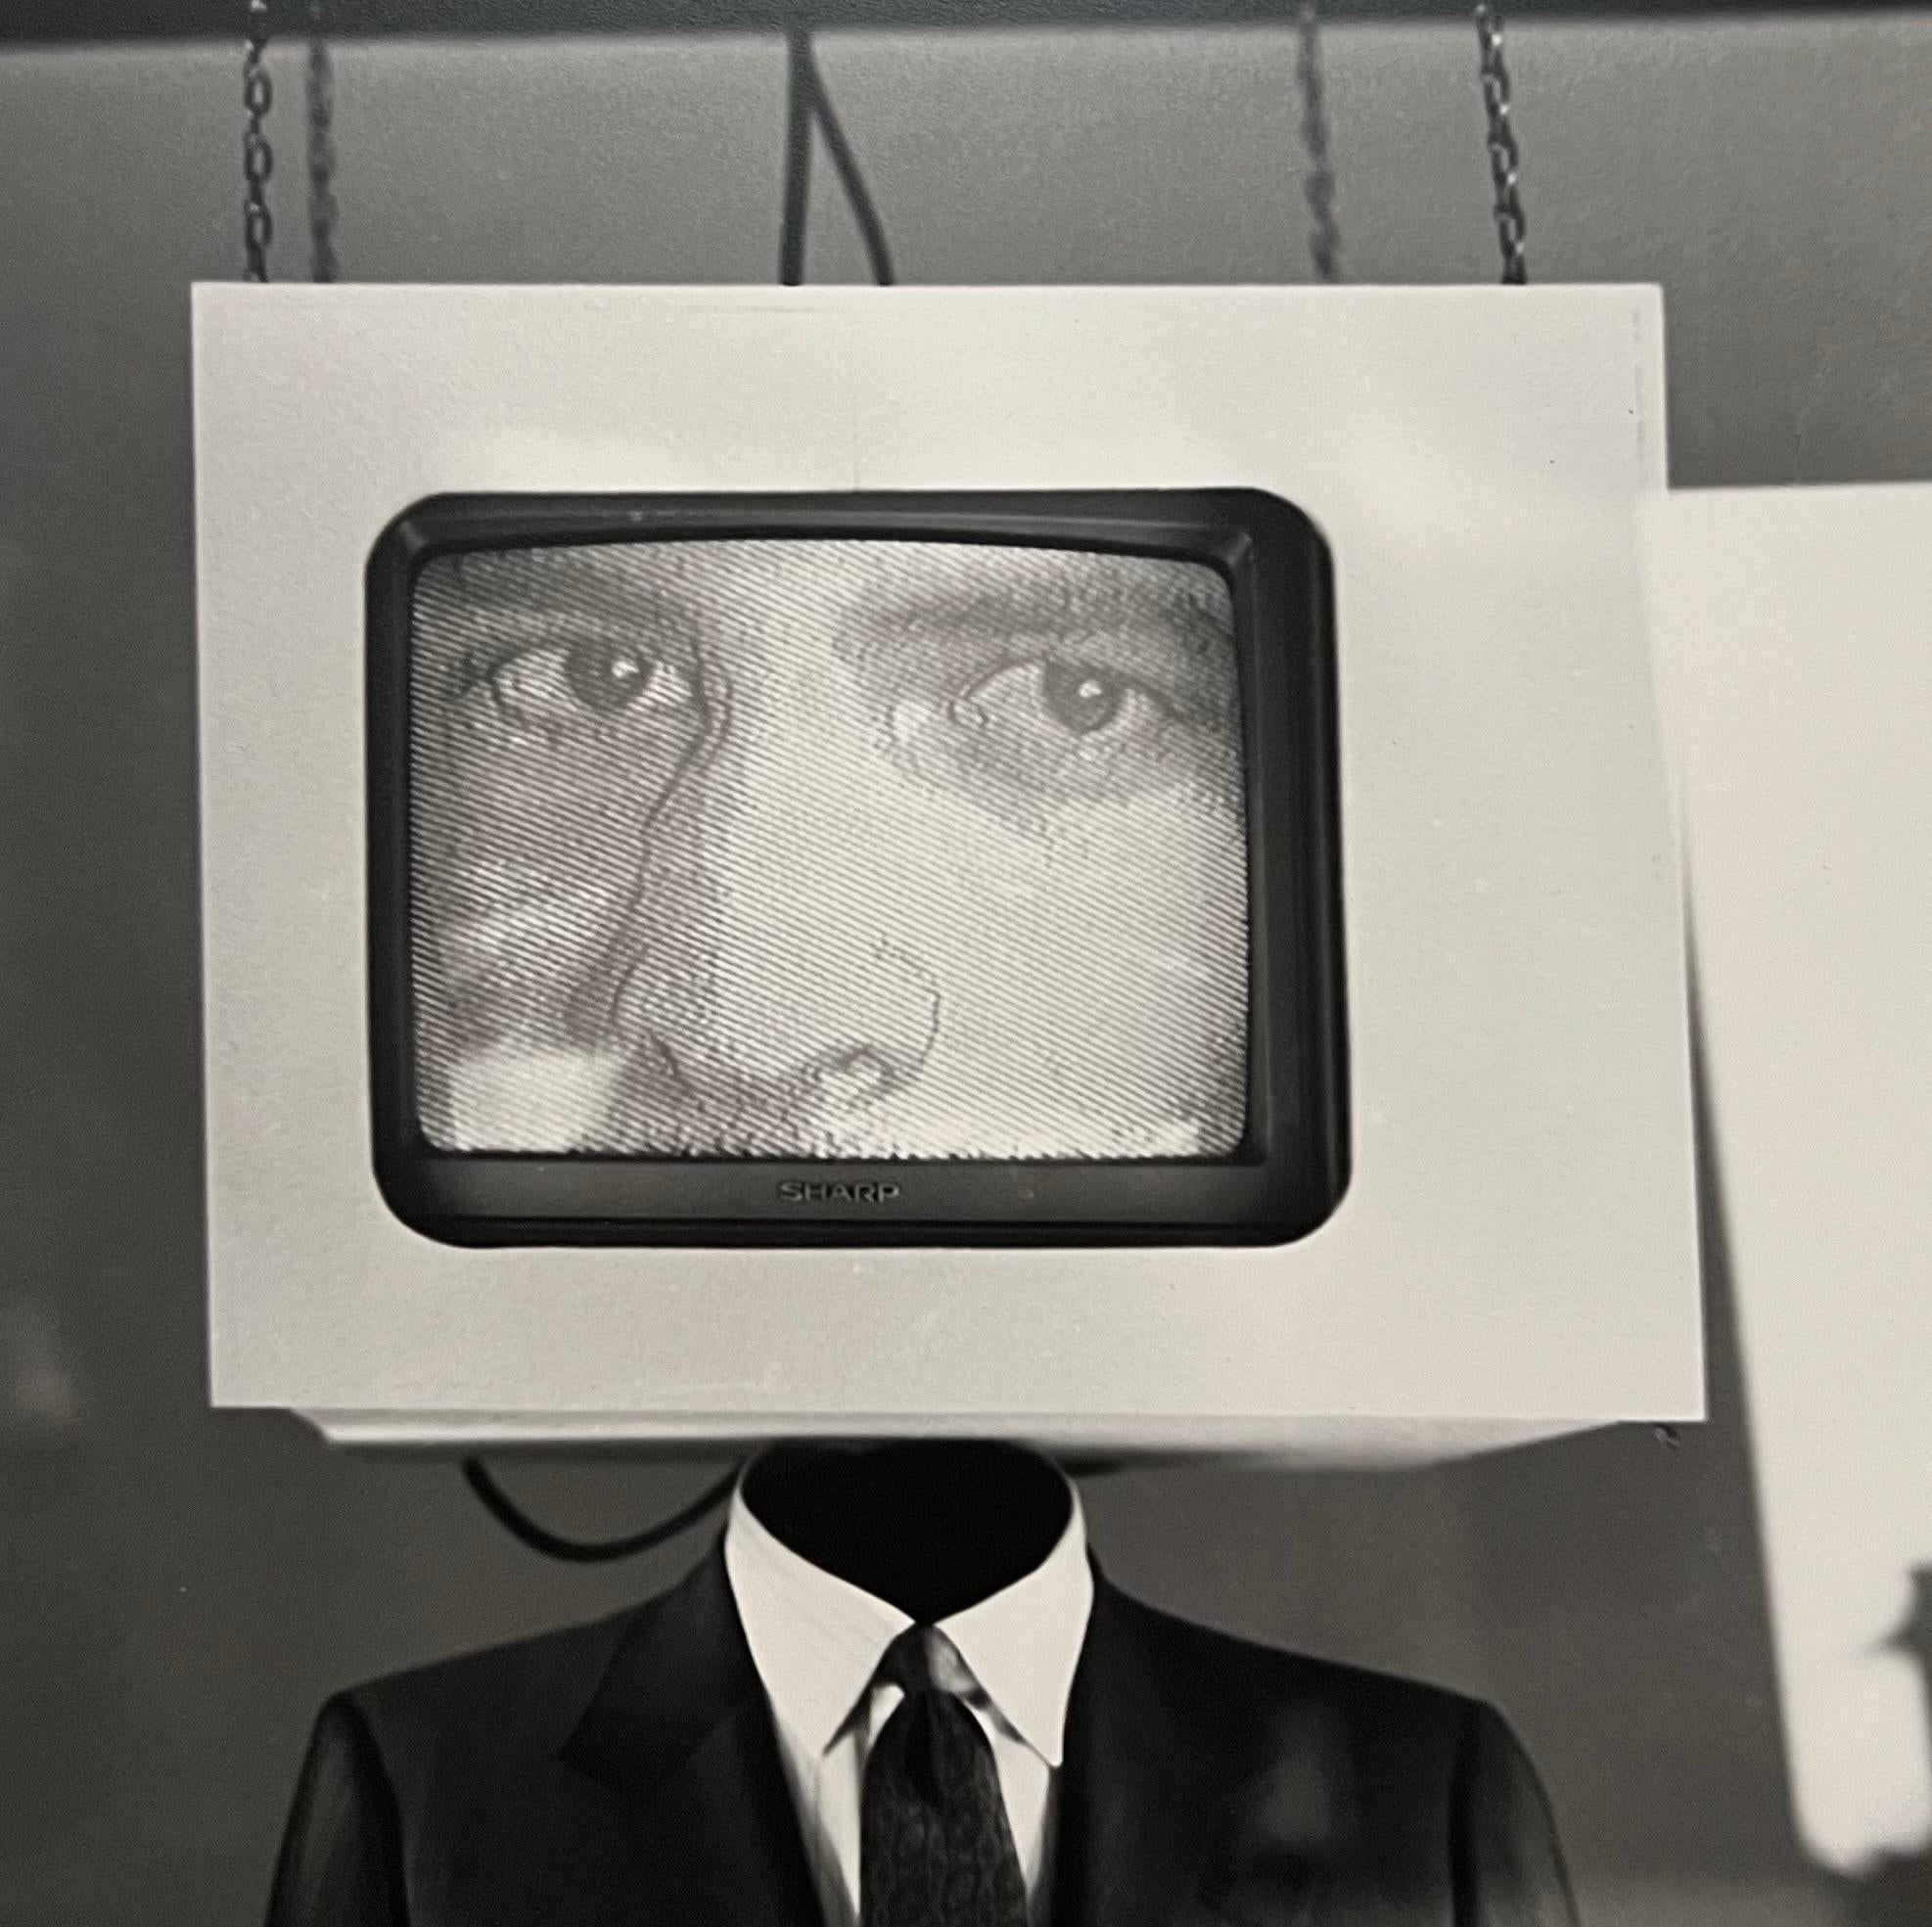 Bruce Cratsley, American (1944-1998)
Vintage gelatin silver print
(Television) TV Head
A surrealist image of a window mannequin man with a TV head.
Hand signed, titled and dated 1987 verso
image (each): 15 1/4 x 15 1/4 inches, matted to 24 X 20